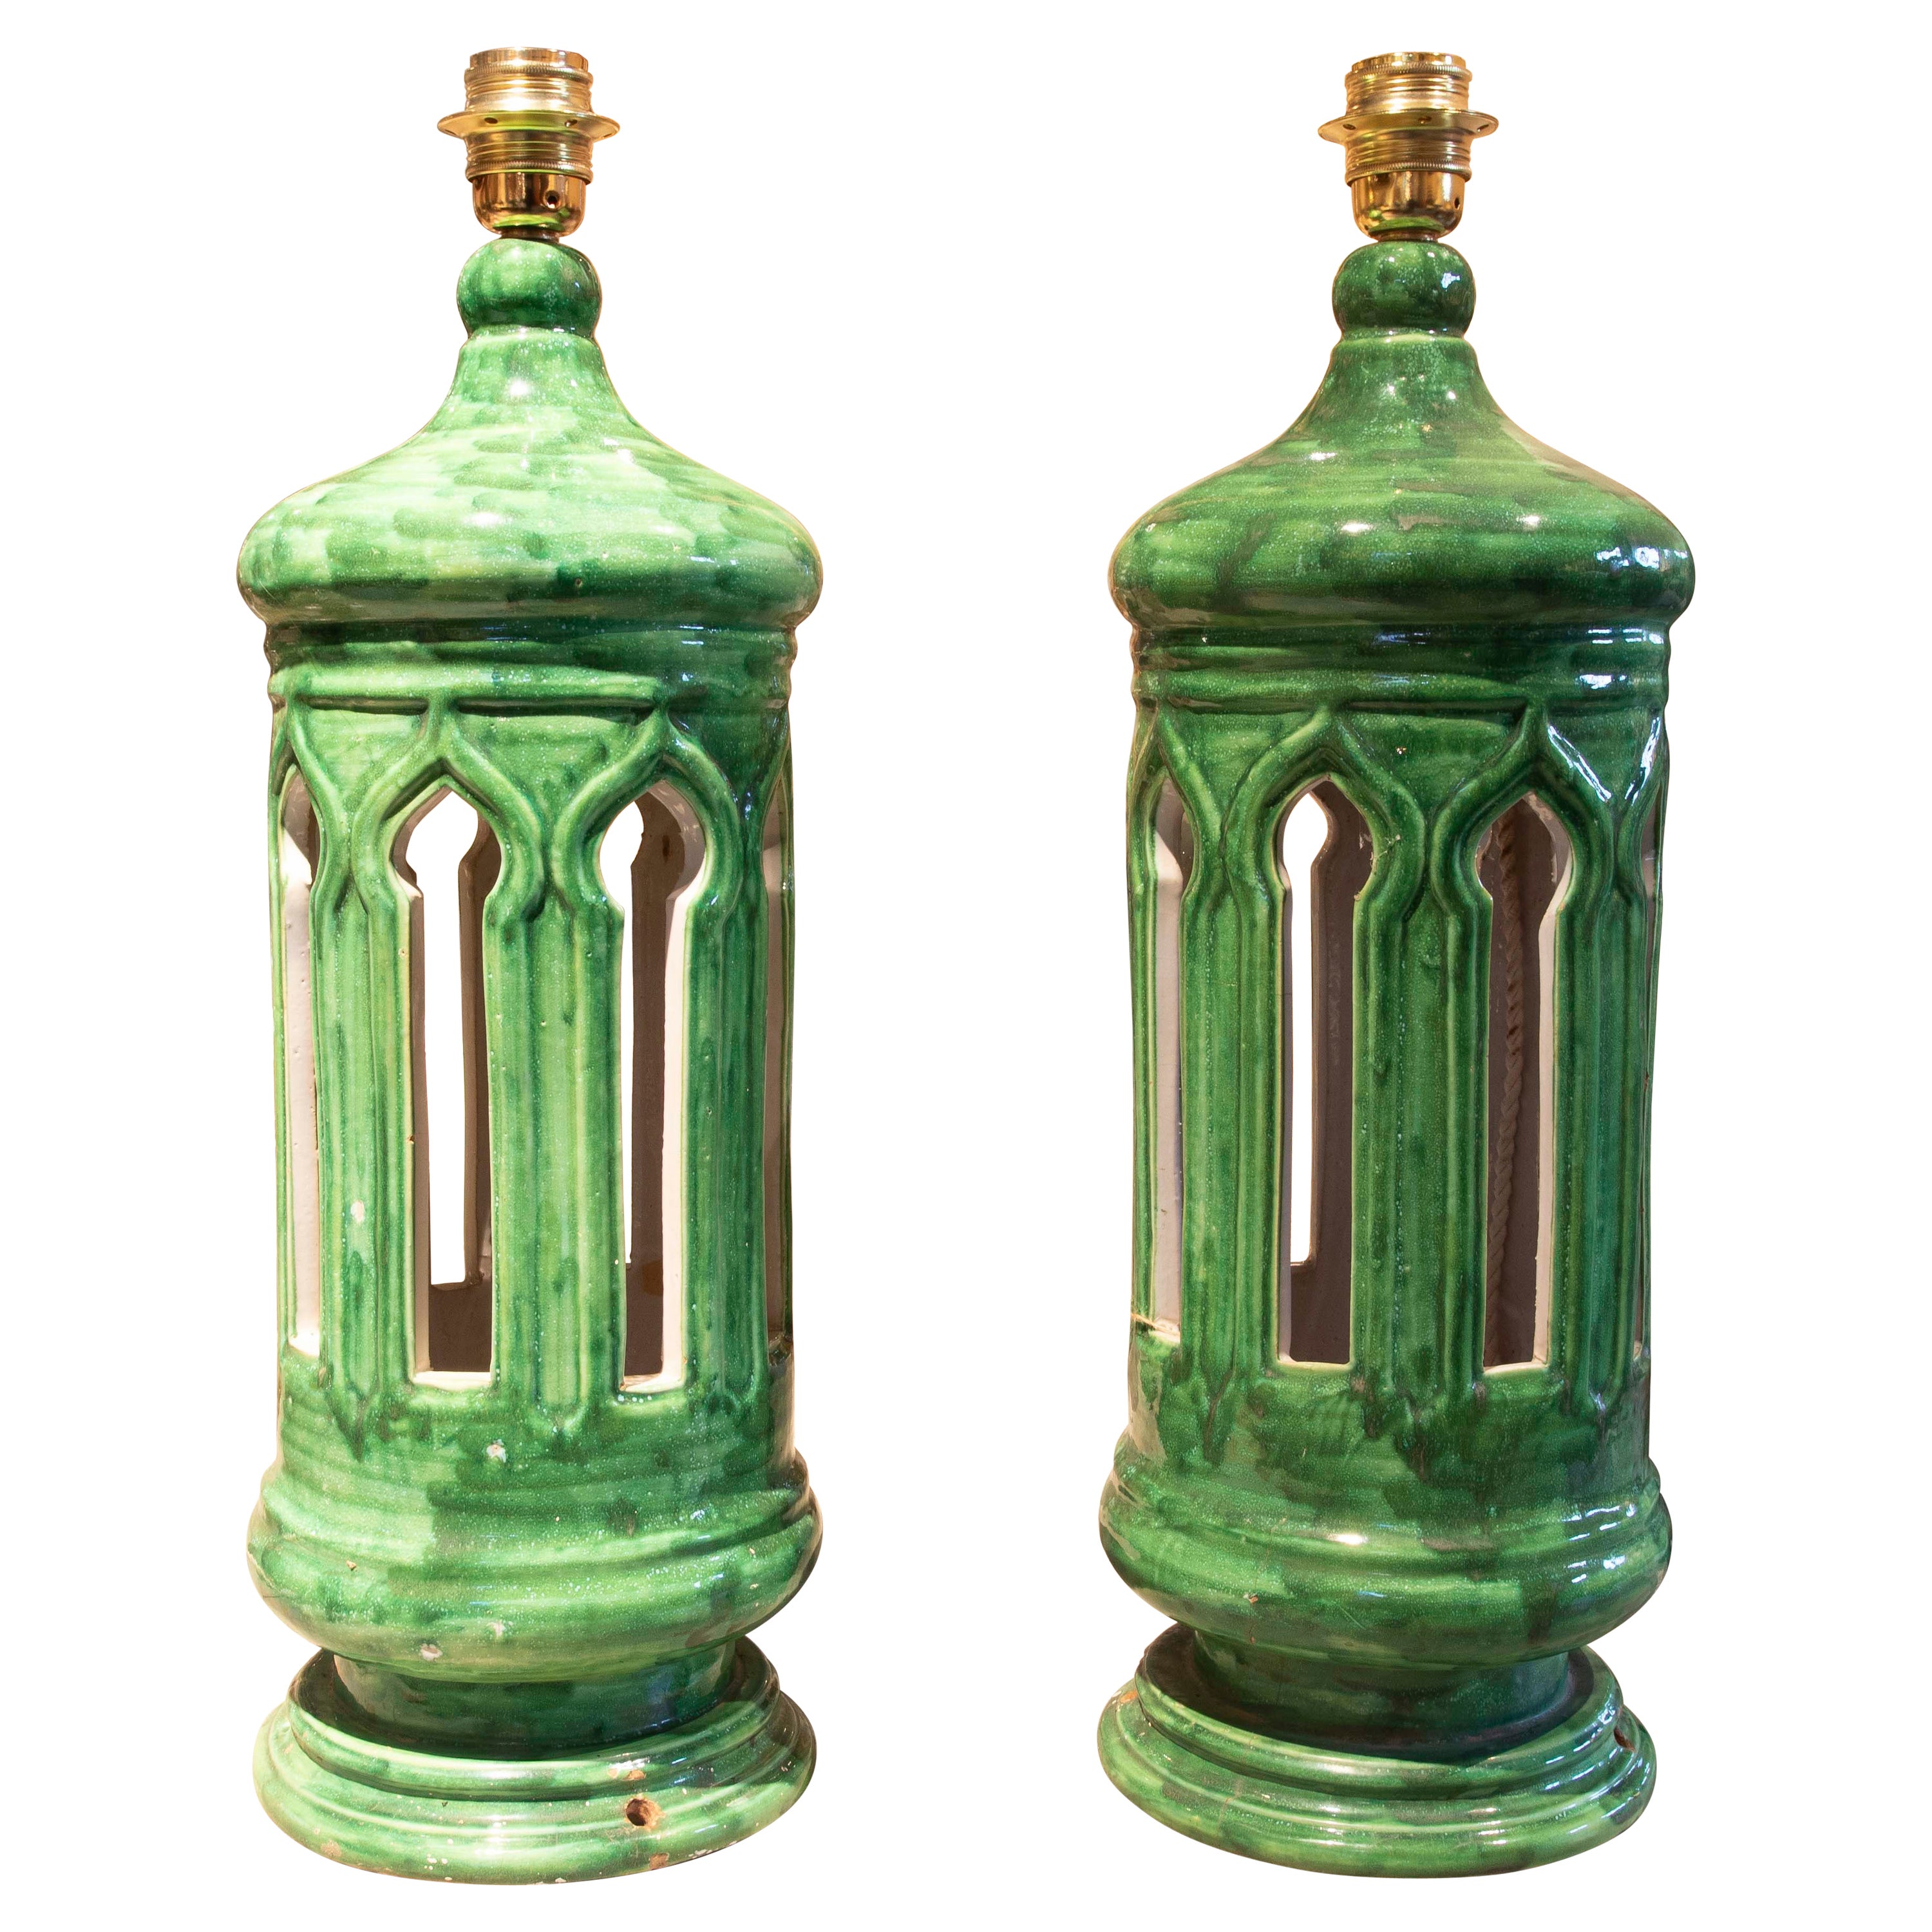 1970s Pair of Green Glazed Ceramic Lamps  For Sale